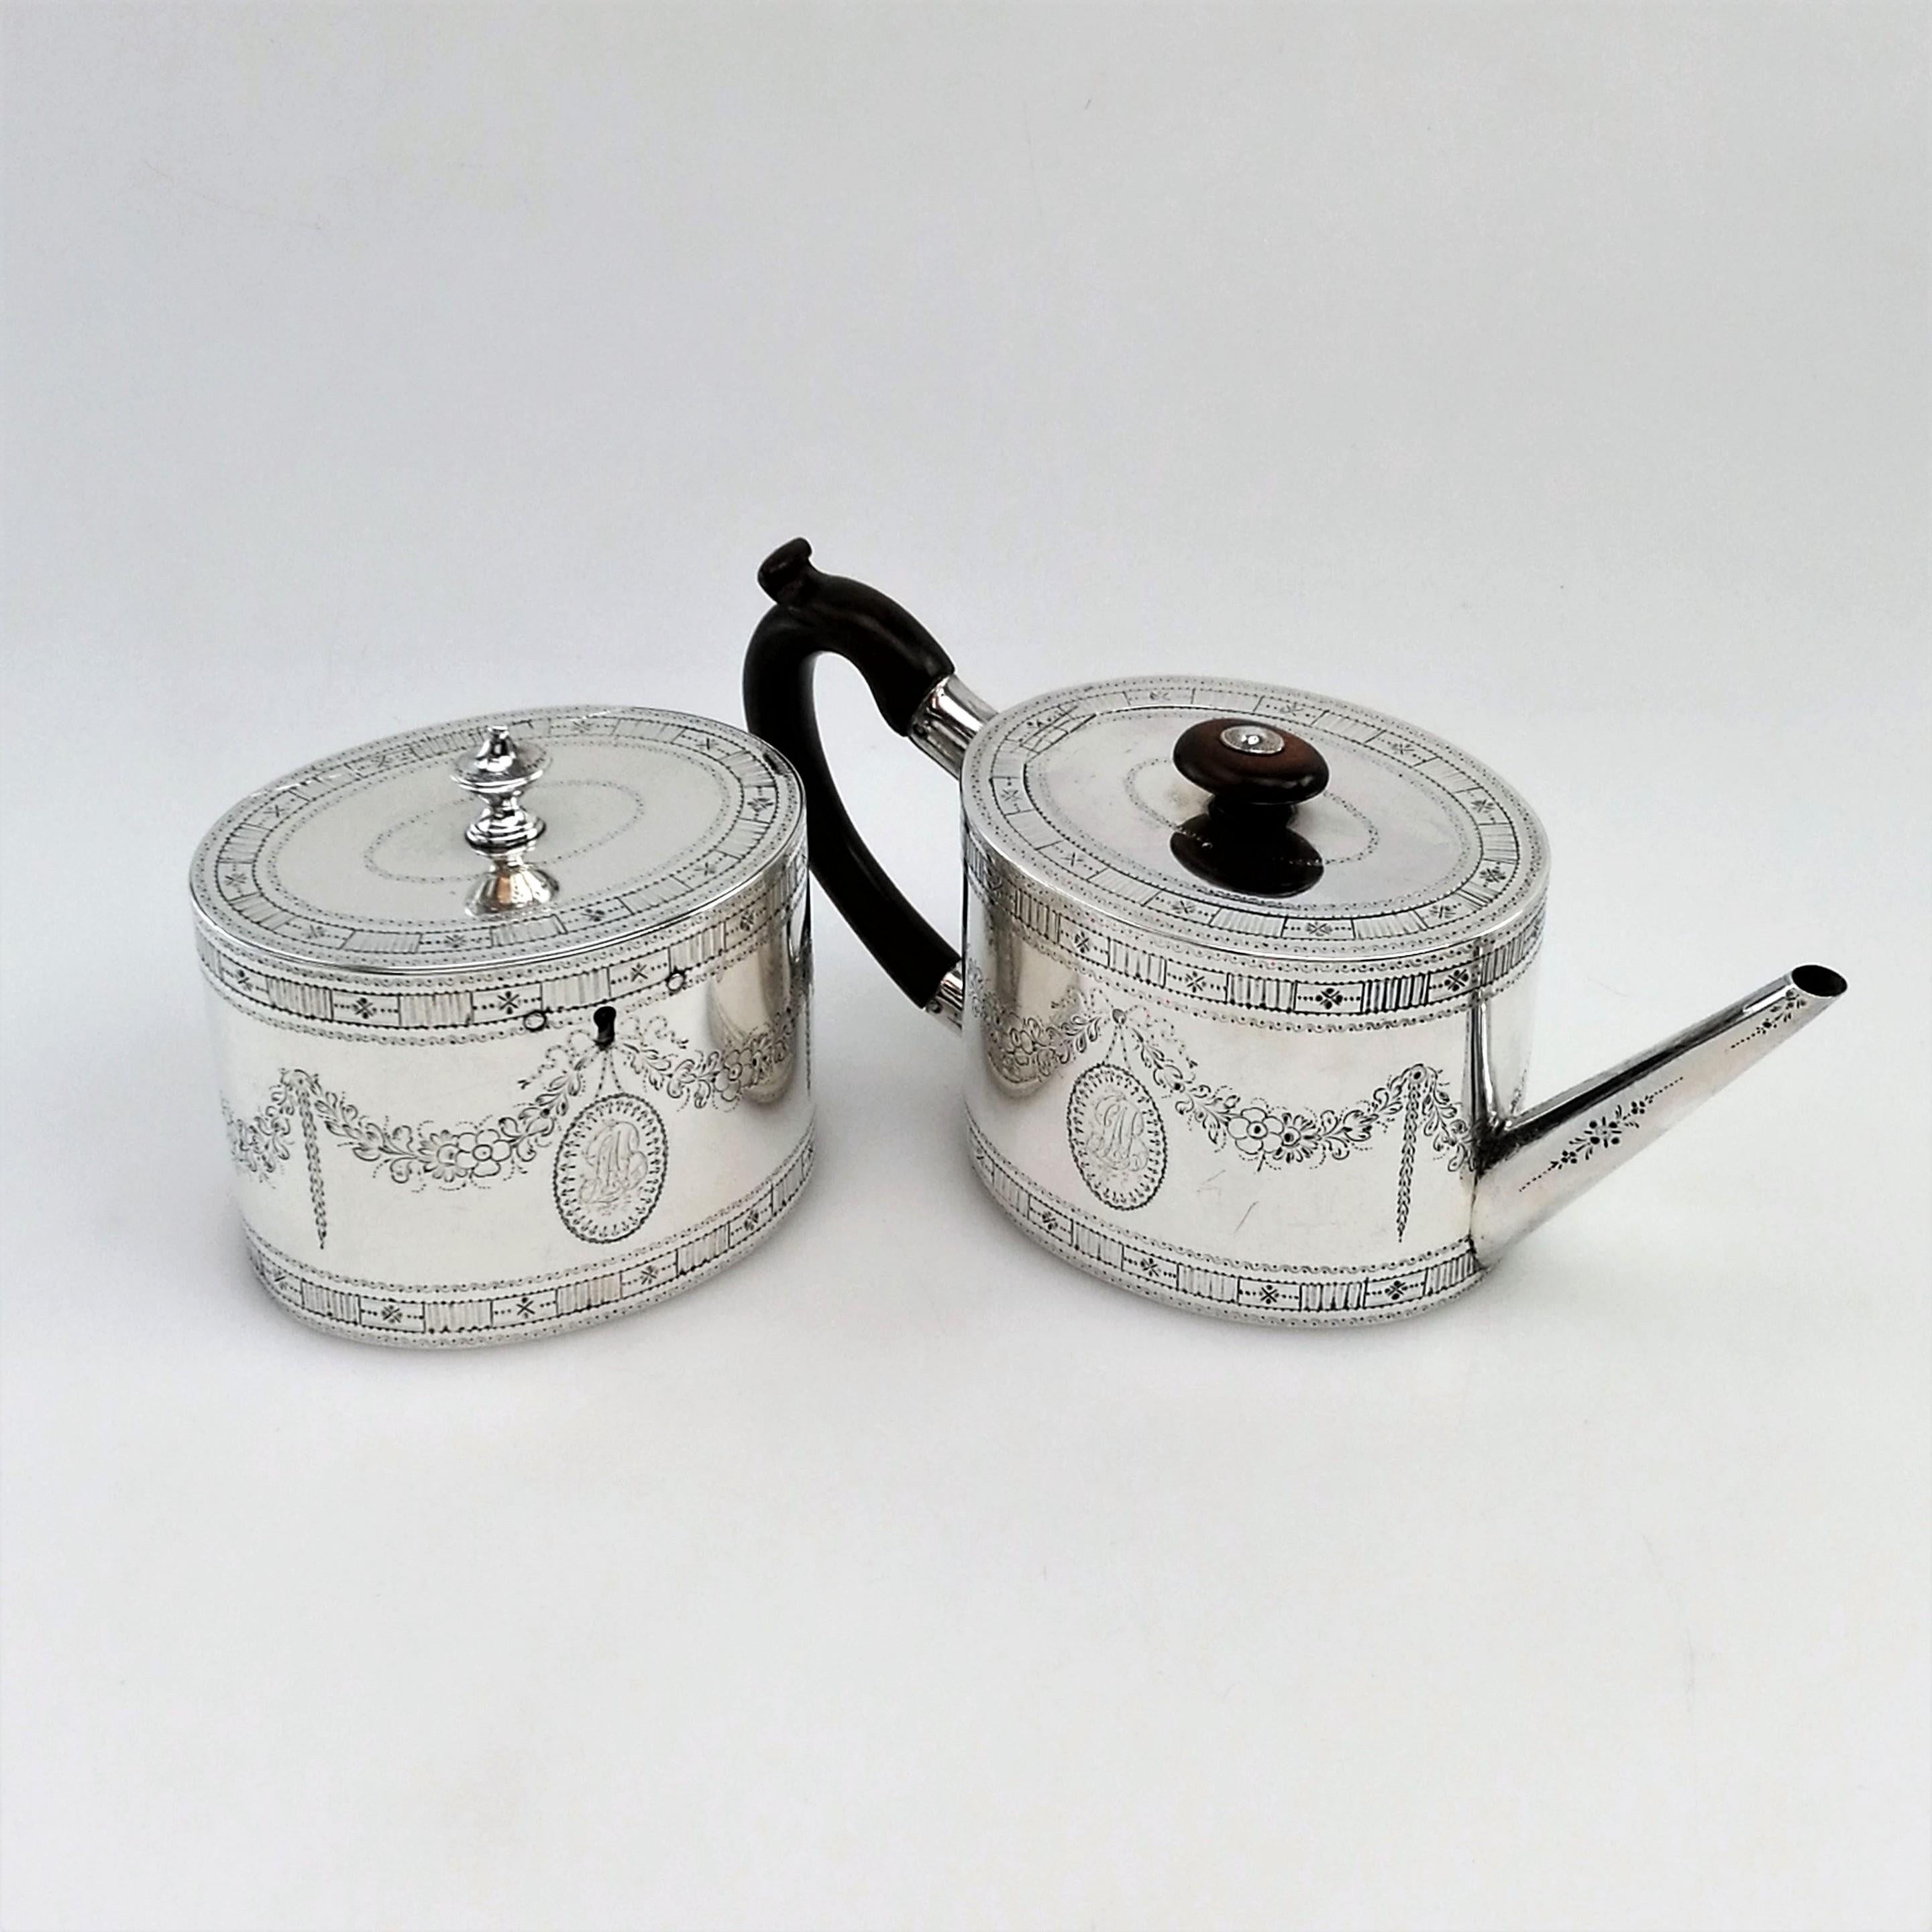 A wonderful matched Antique George III Sterling Silver Teapot & Tea Caddy Set. Each piece is in a classic oval can shape and each is embellished with an ornate border on both top & bottom rims of the body and around the rims of the lid. The bodies